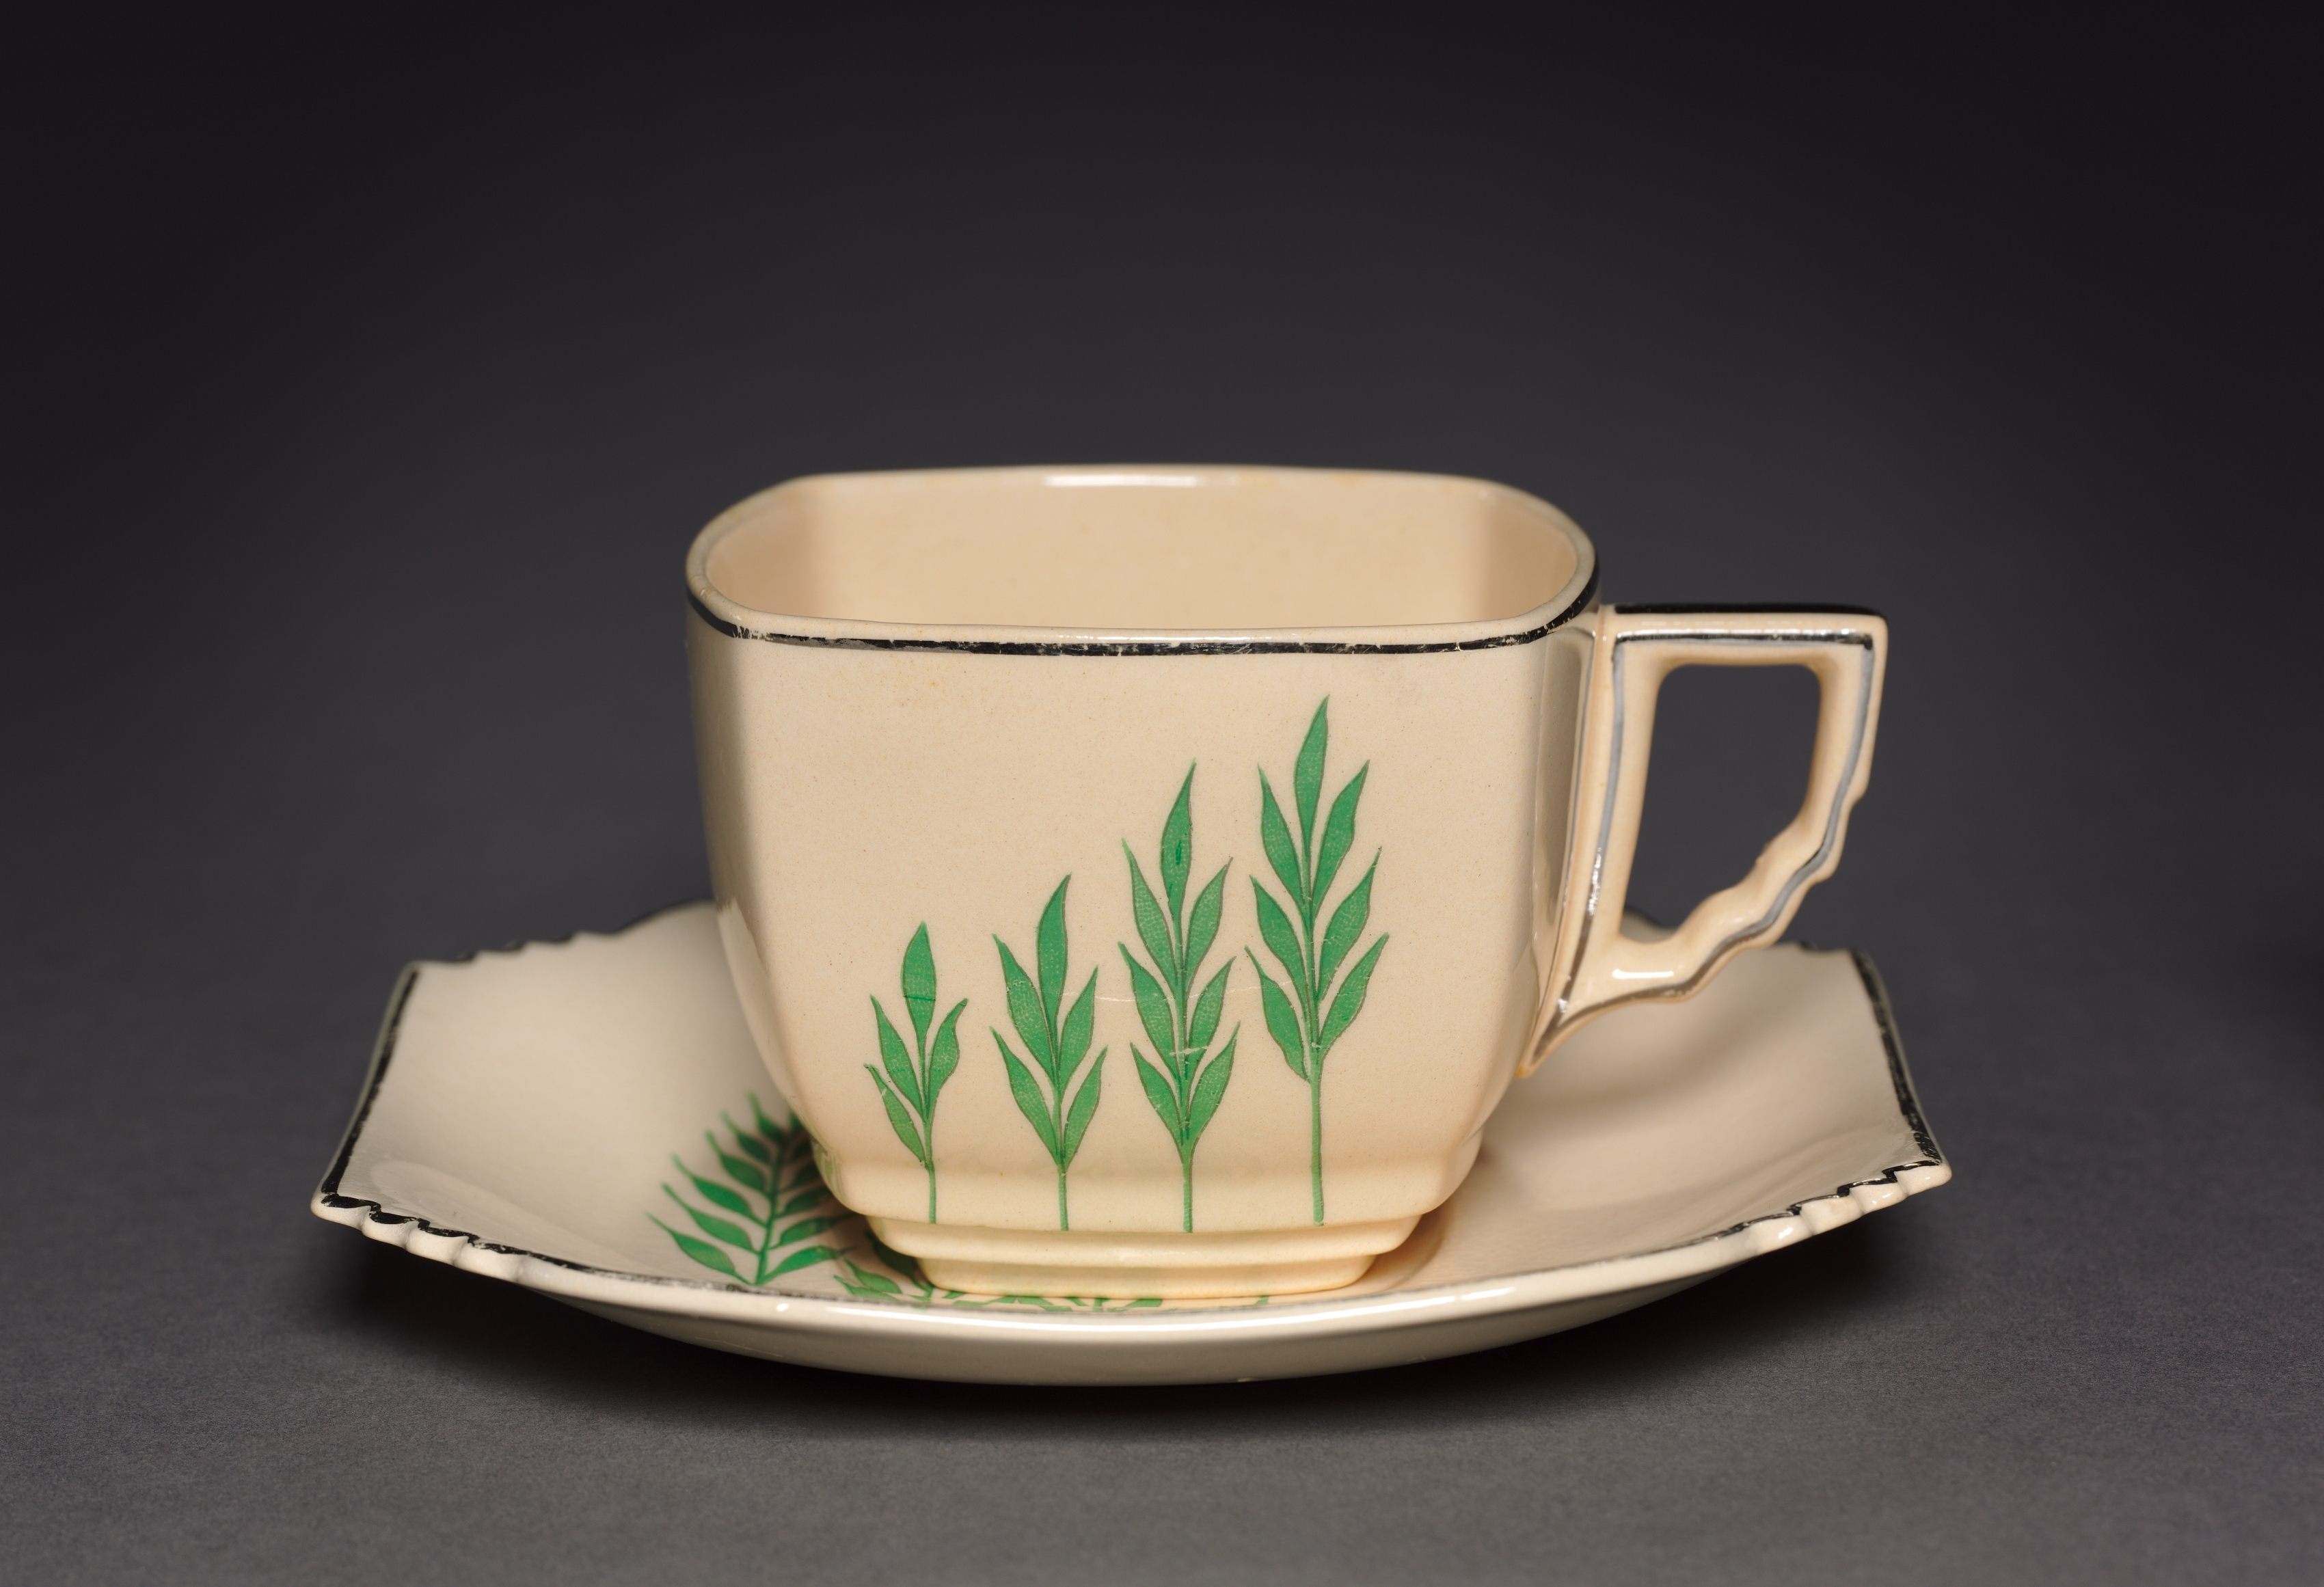 Green Wheat Cup and Saucer